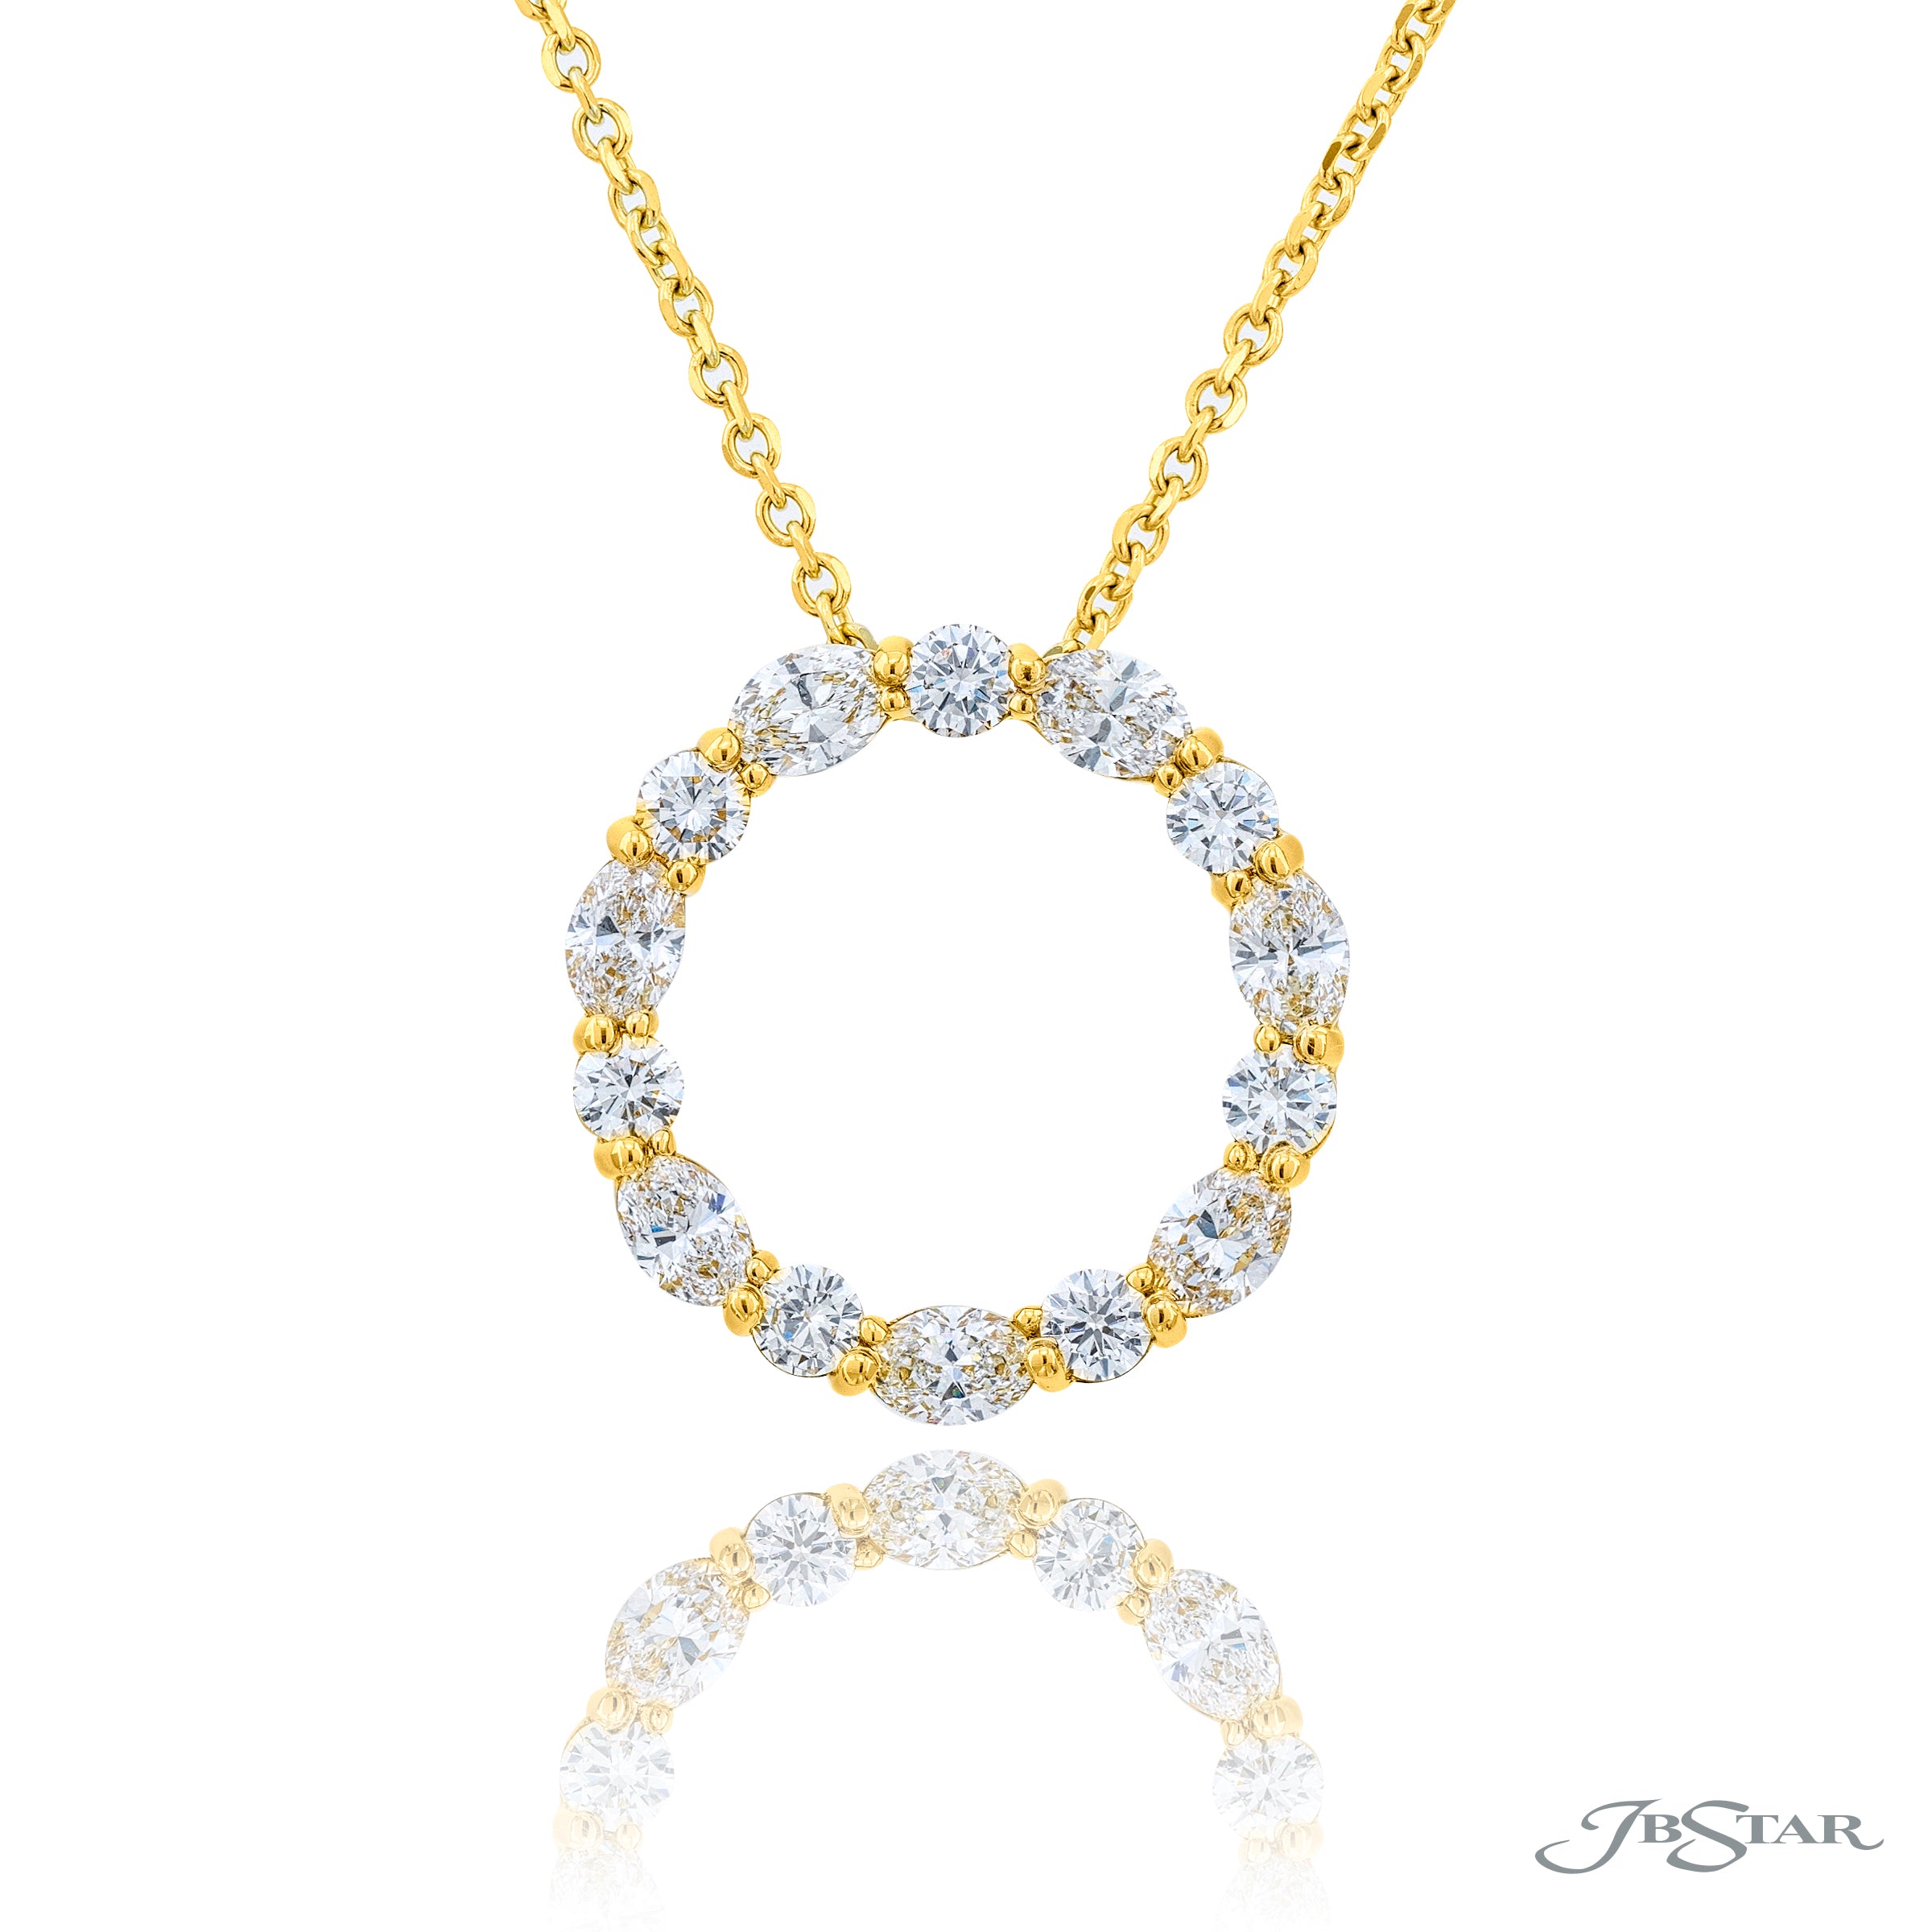 18K YELLOW GOLD ROUND AND OVAL CUT DIAMOND CIRCLE OF LIFE NECKLACE